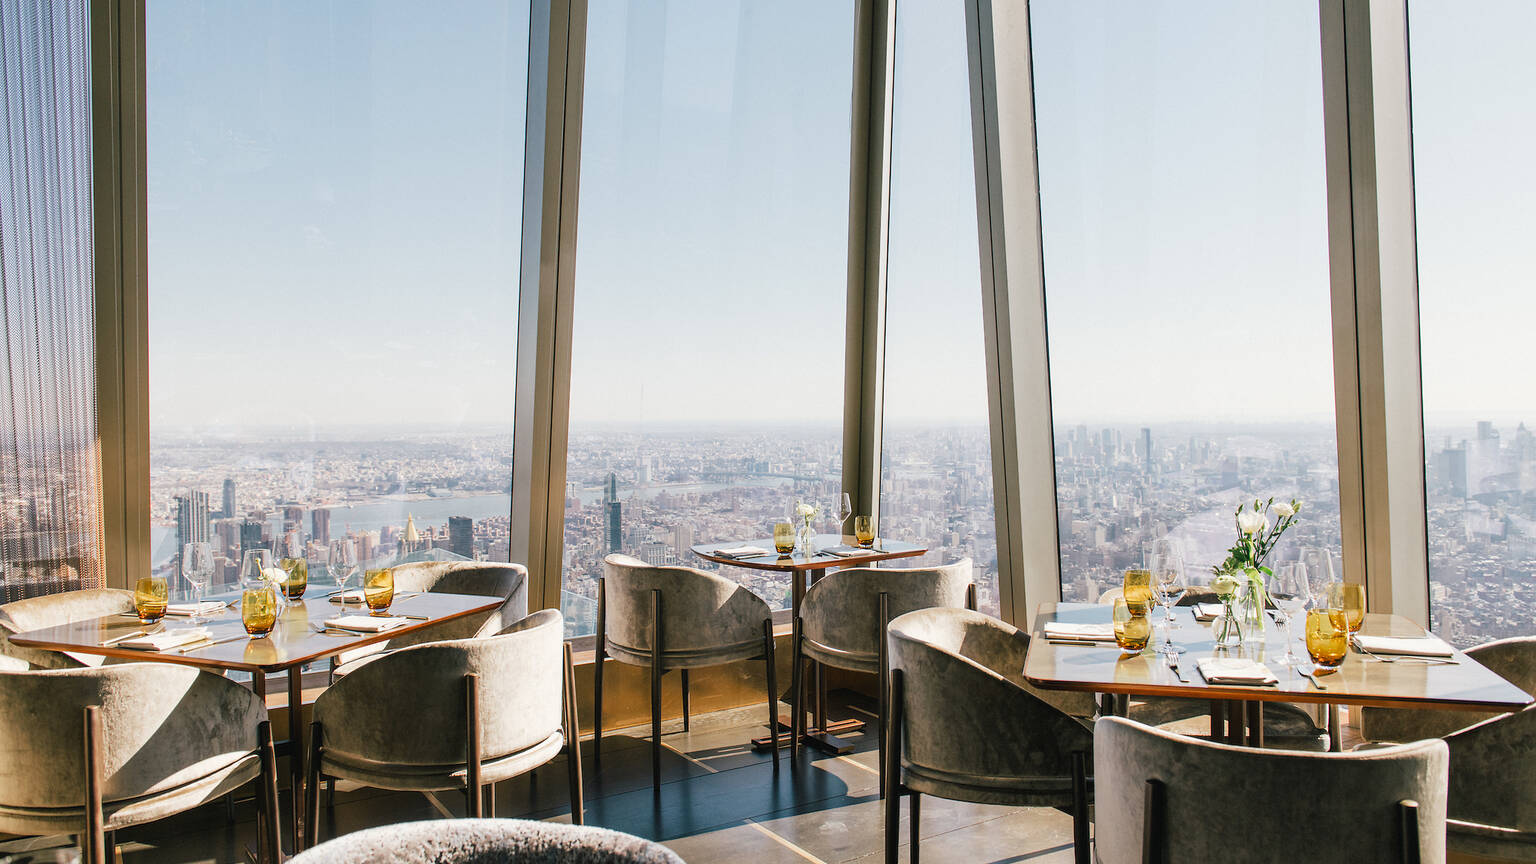 Peak Restaurant at Hudson Yards officially opens March 12